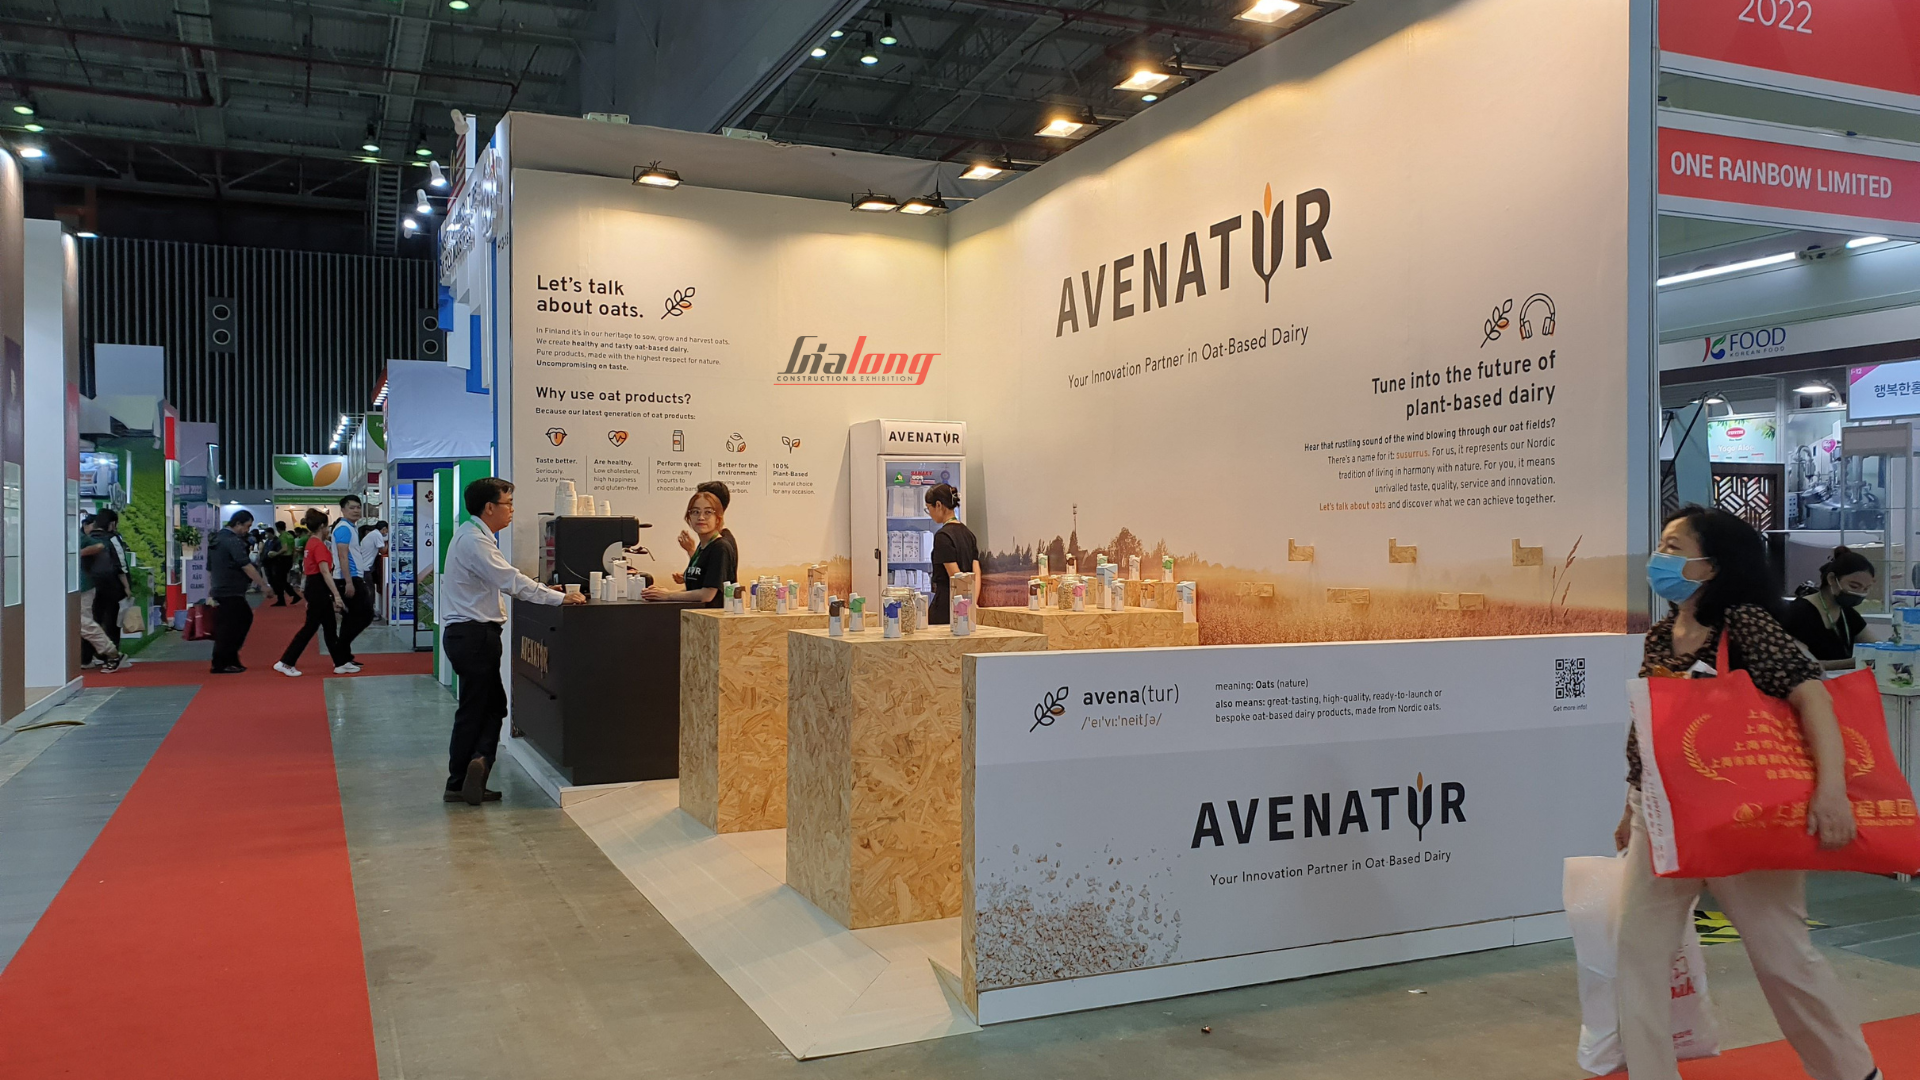 AVENATUR - The booth was constructed and designed by Gia Long